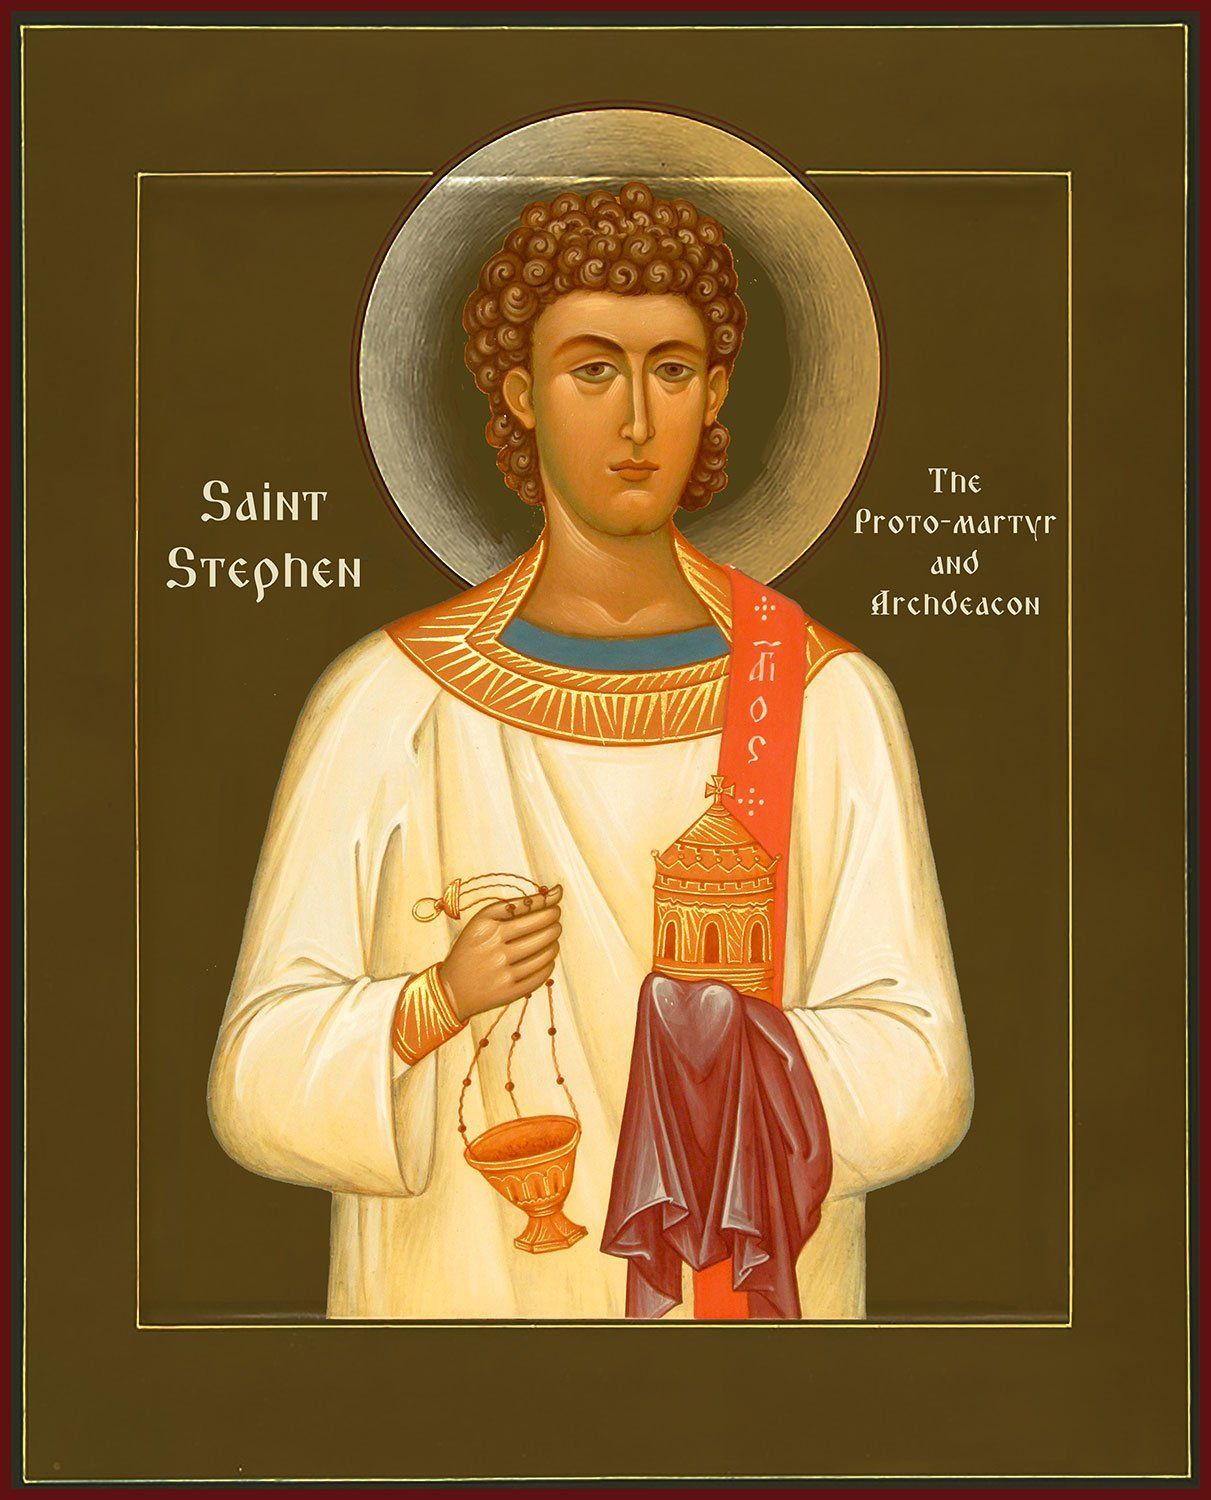 St. Stephen, Christmas Martyrdom, and Trying Something New